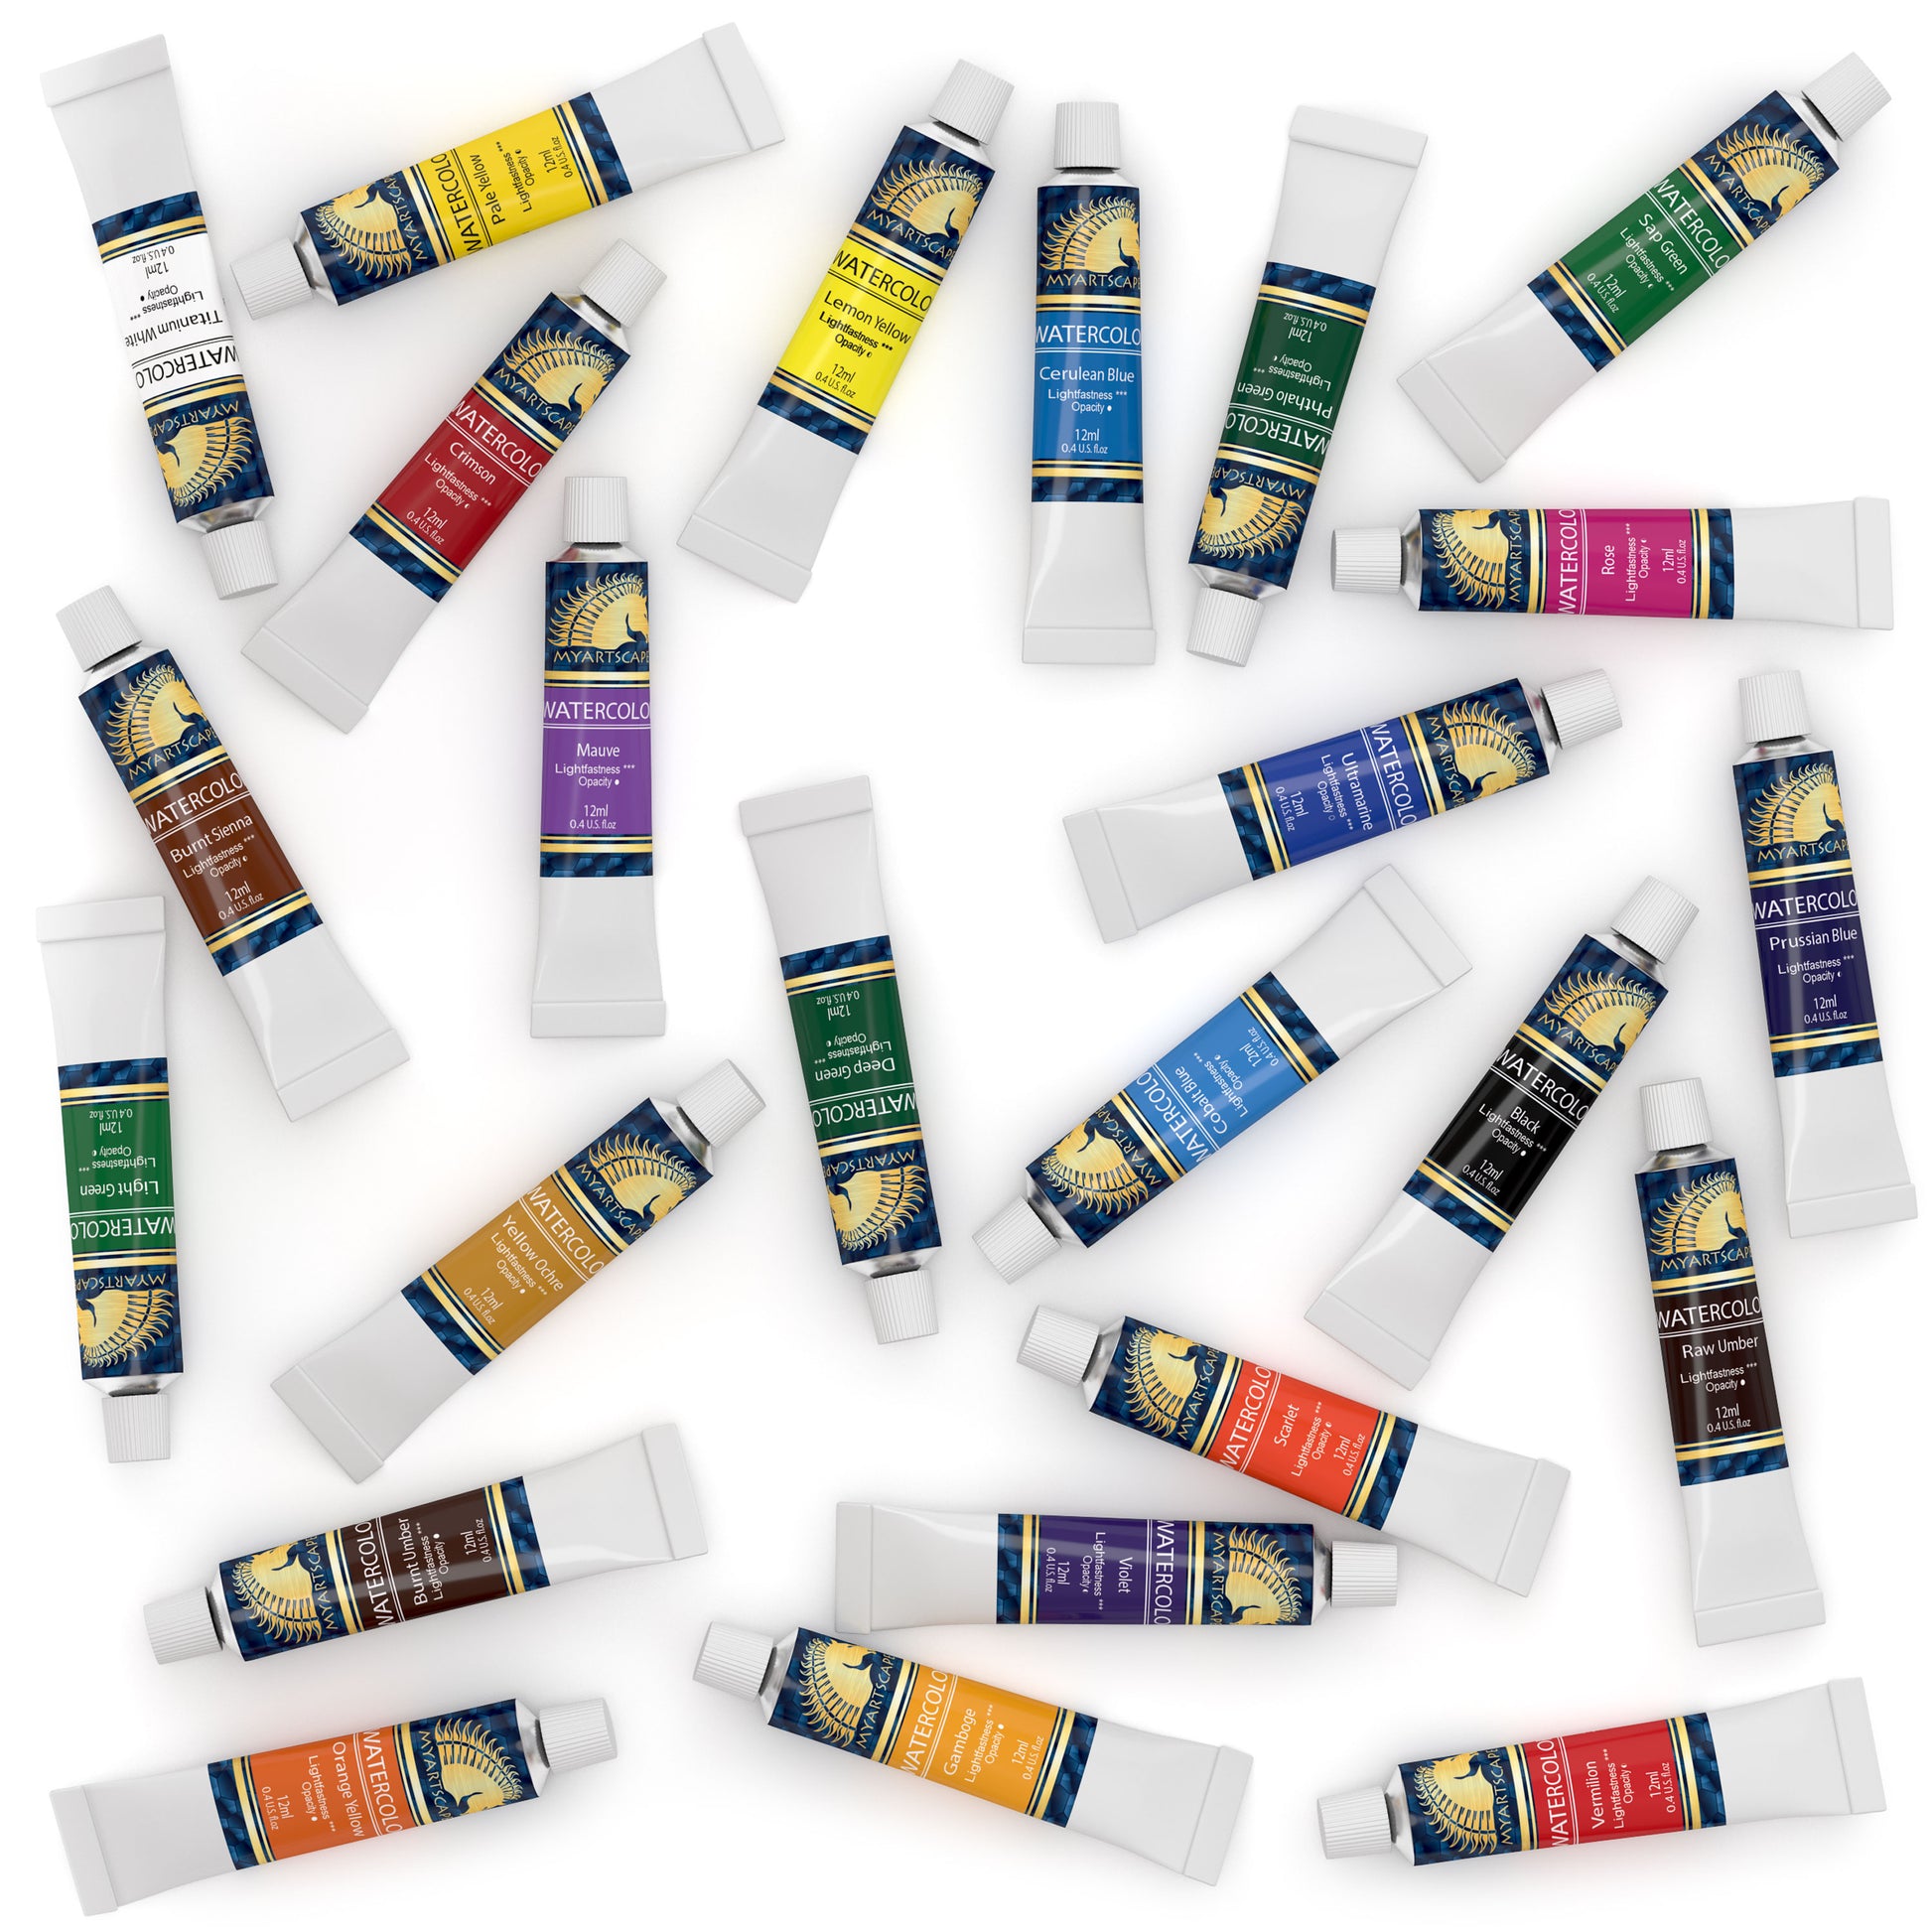 Paul Rubens Watercolor Paint, 24 Vibrant Colors Highly Pigmented, 5ml Each  Tube, Perfect for Painters, Artists, Hobbyist